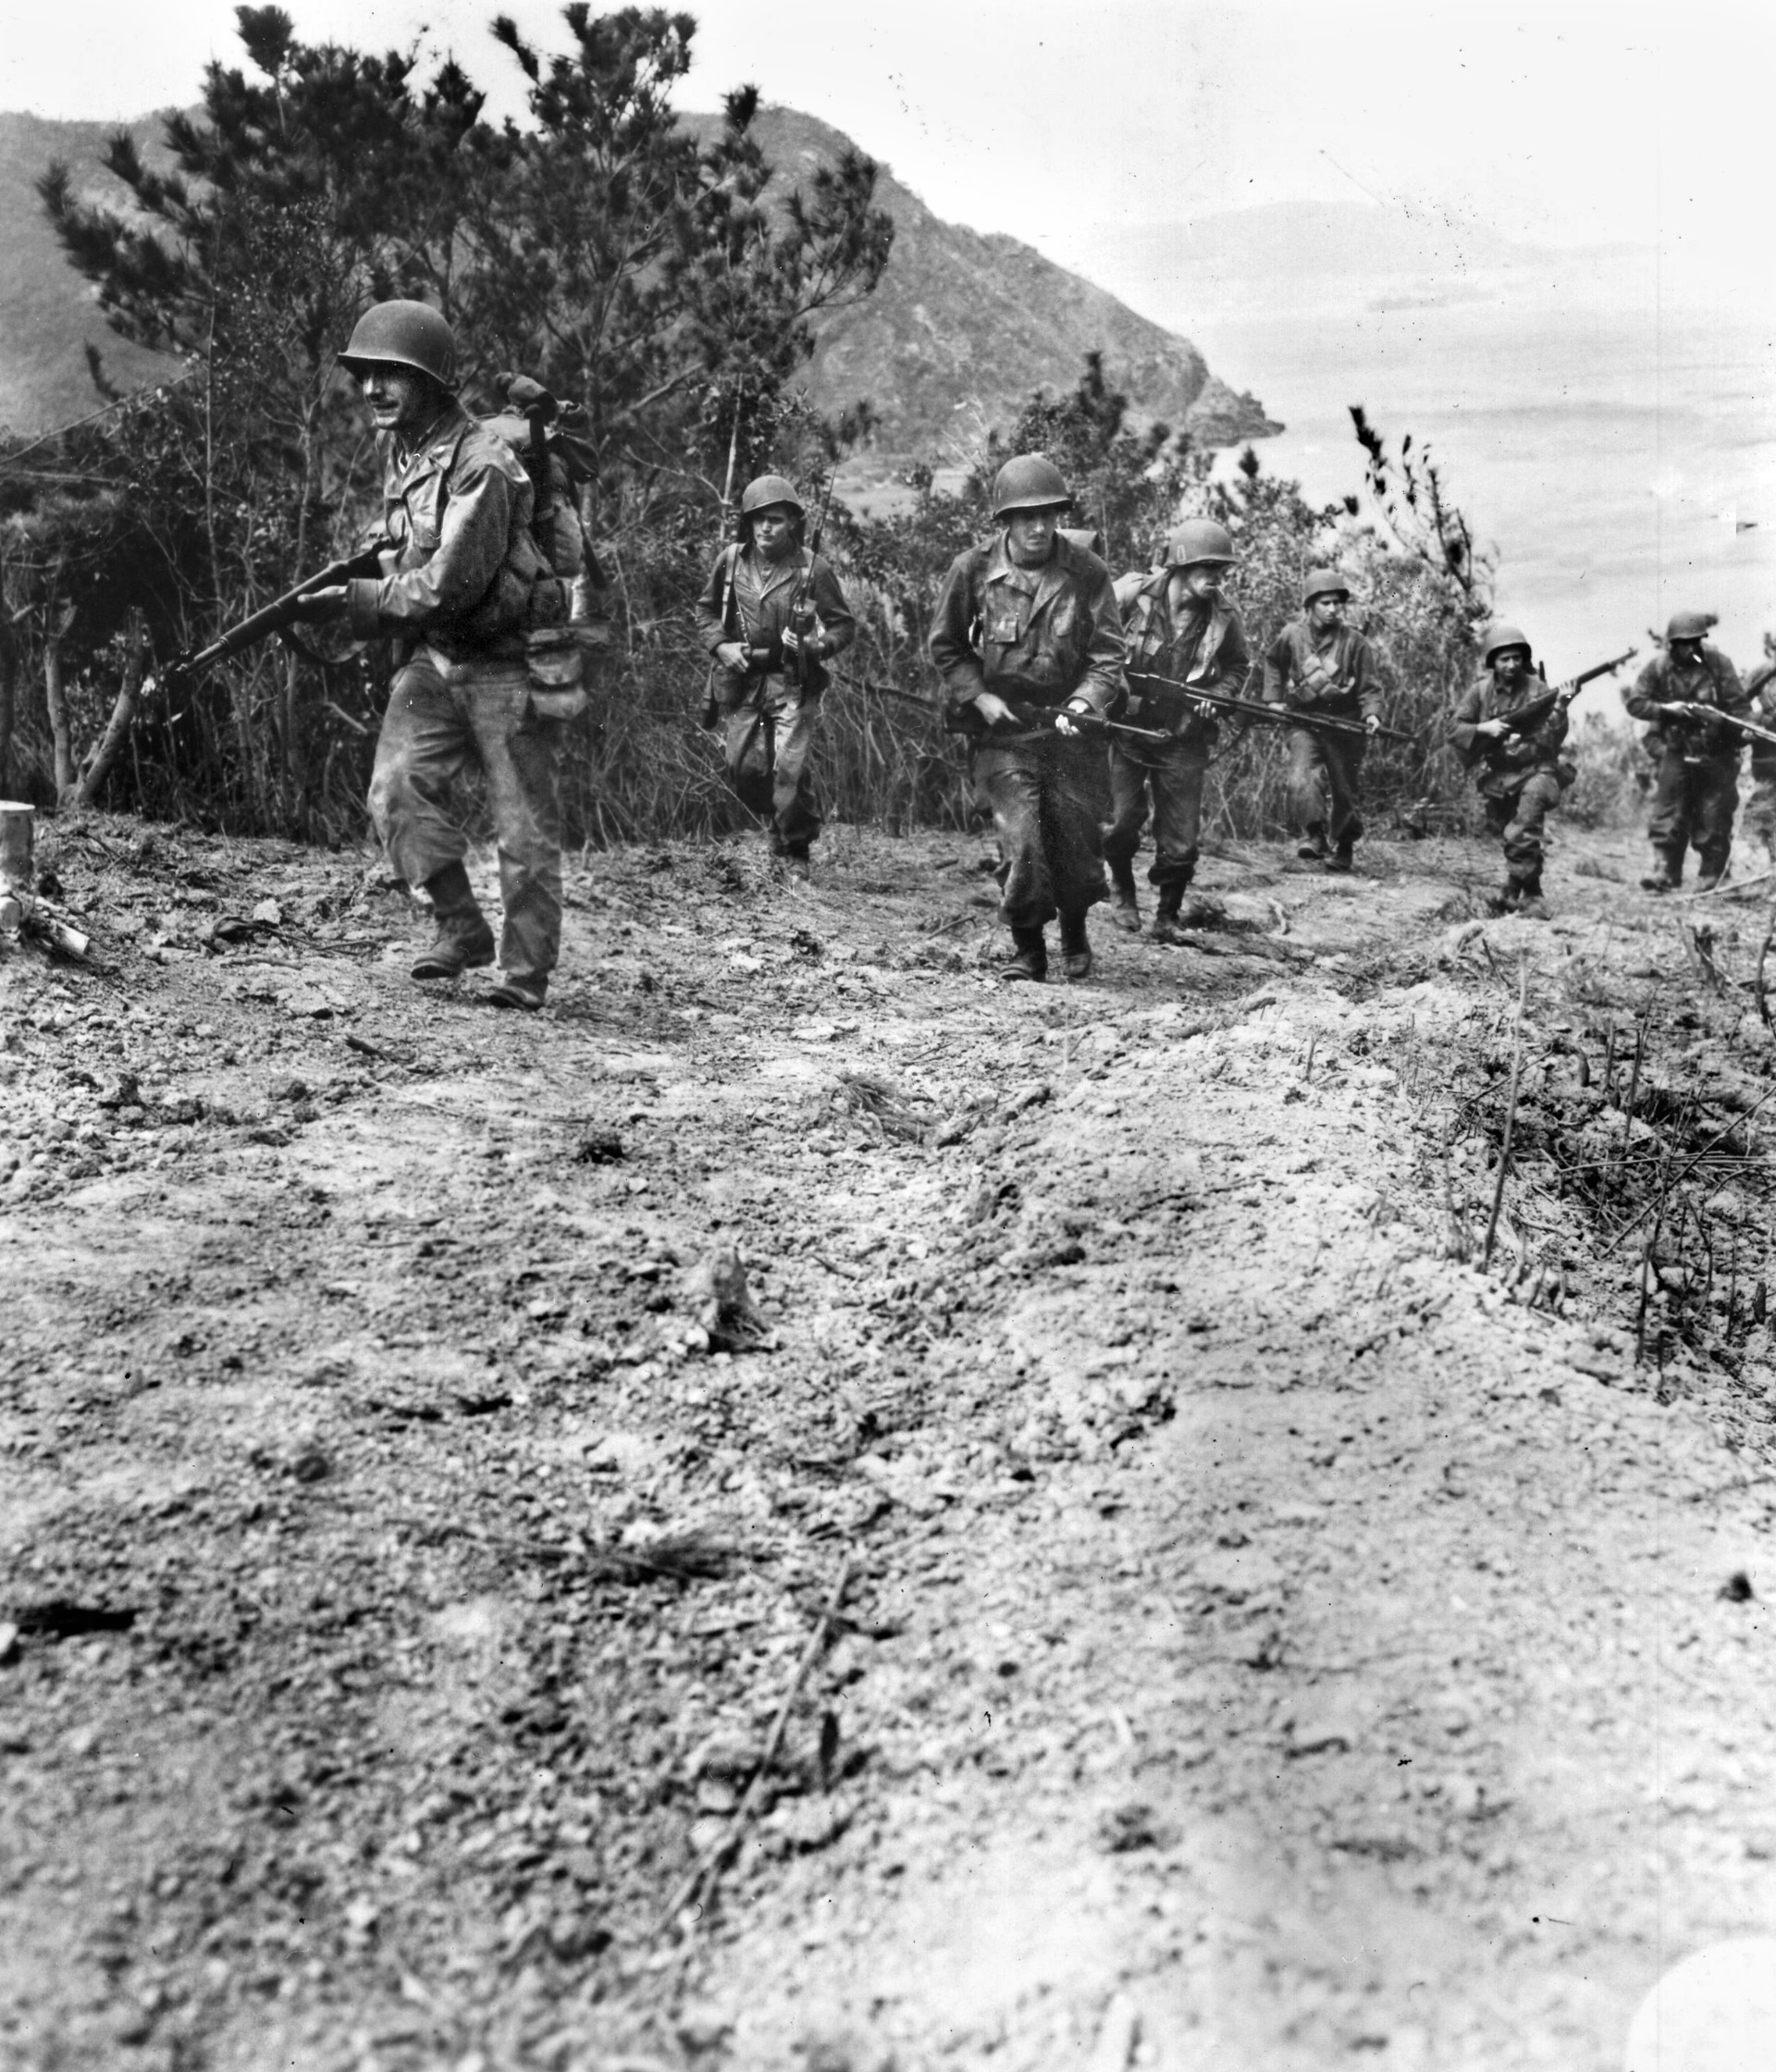 An advance patrol of the 77th Infantry Division moves cautiously up a trail on Takashiki Shima, scouting an advance route for the main body that later overran the island.